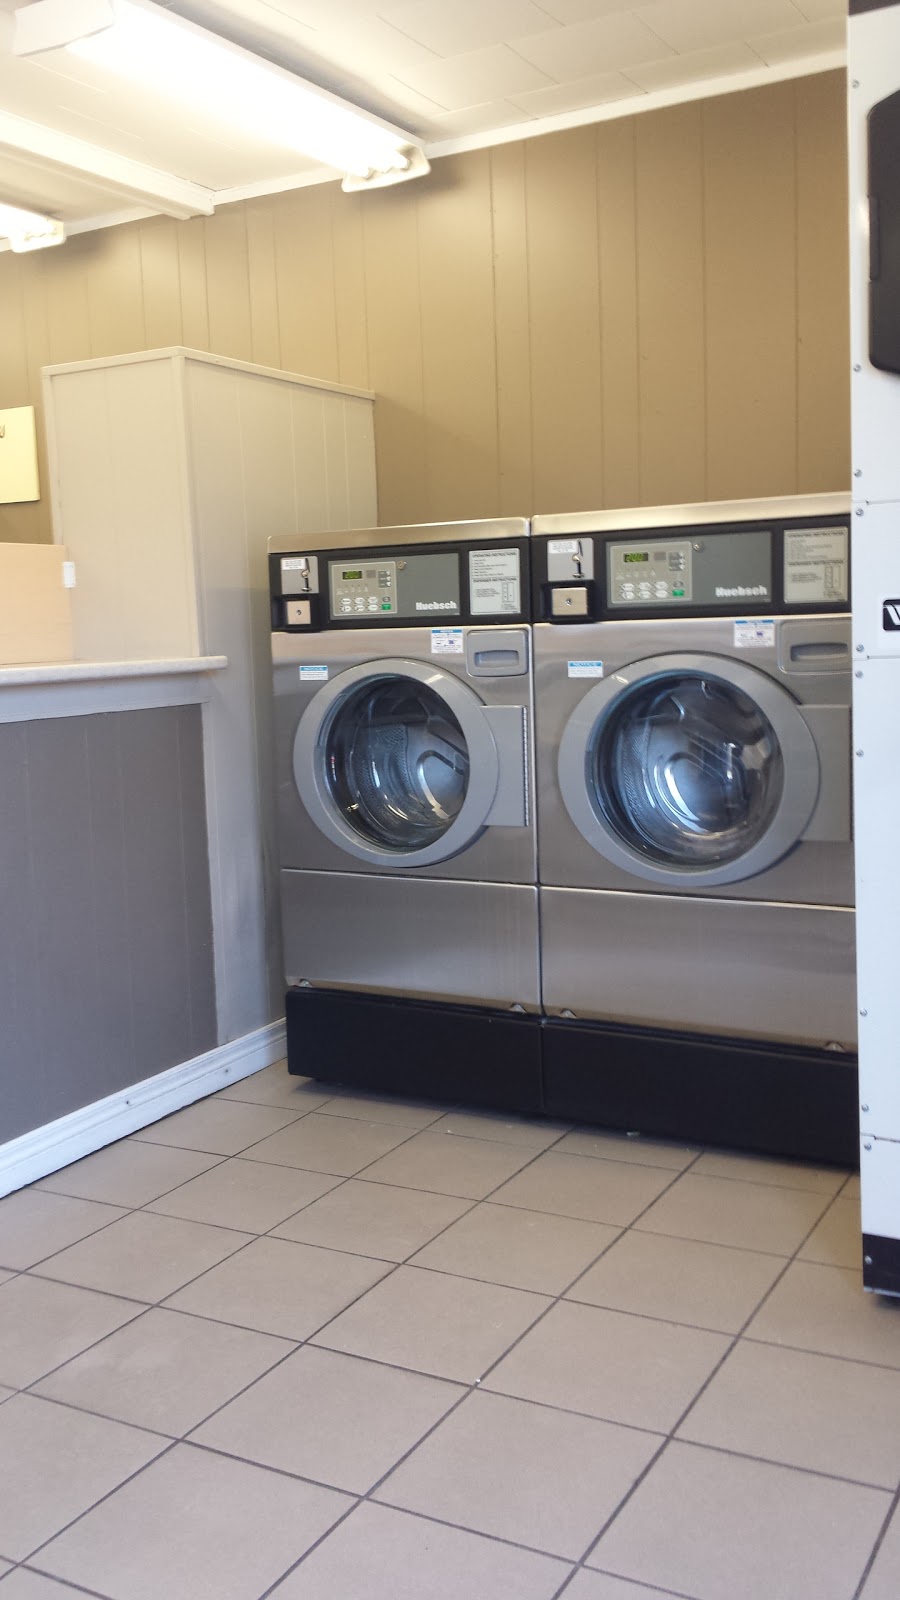 Chrystal Clean Laundromat | laundry | 723 Ontario St, Sarnia, ON N7T 1M3, Canada | 5193375222 OR +1 519-337-5222